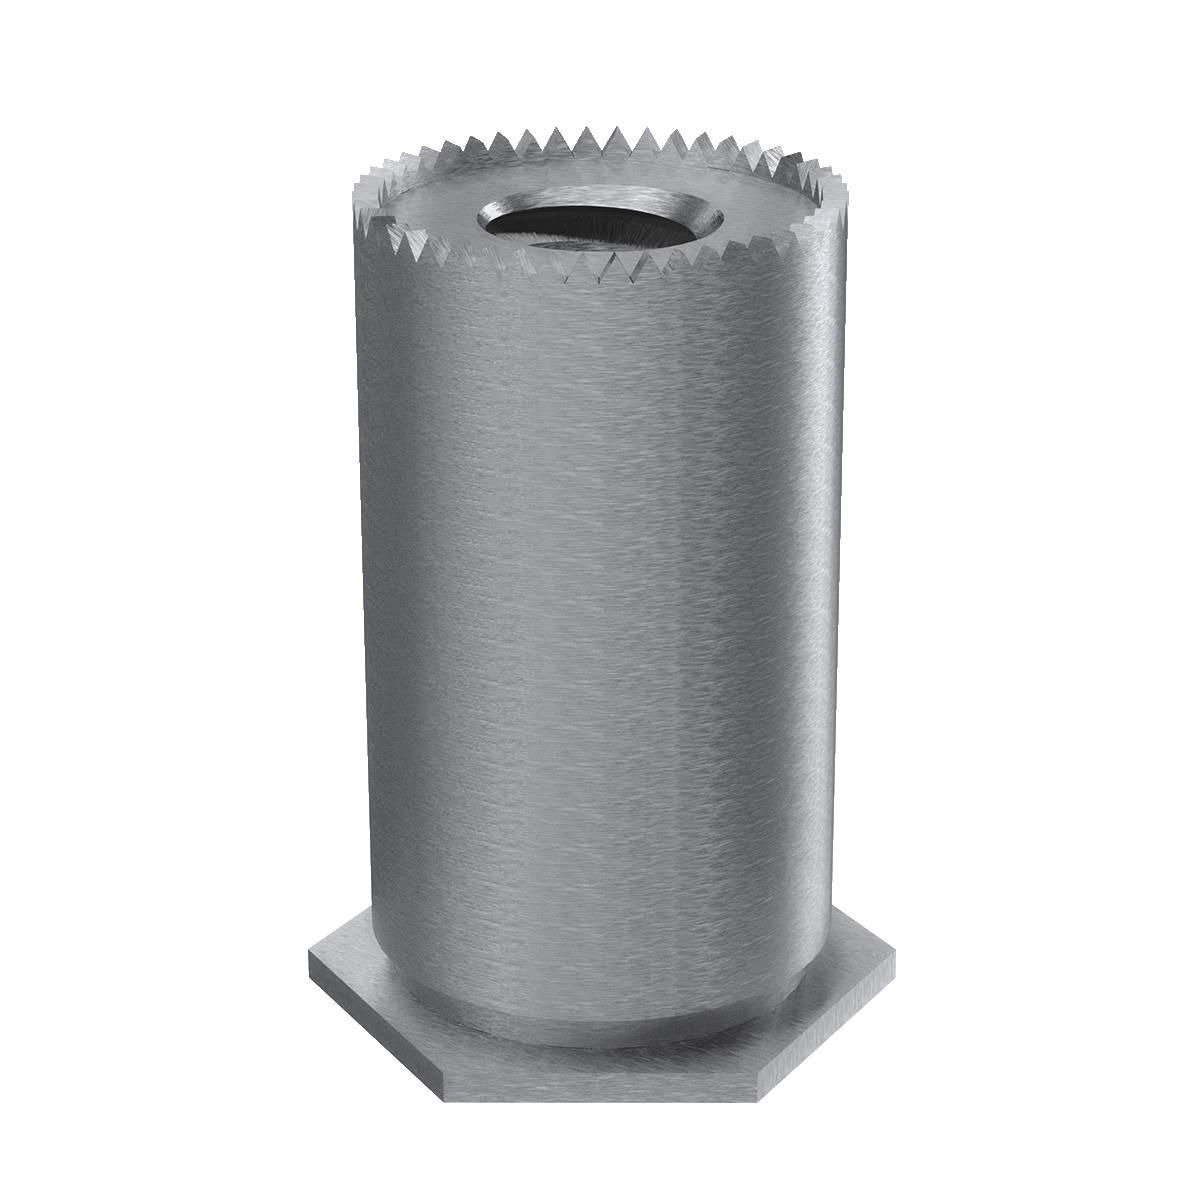 Self-Clinching Standoff, Self-Grounding, 300 Series Stainless Steel, Passivated, M3x0.5 x 8, 100 Pack